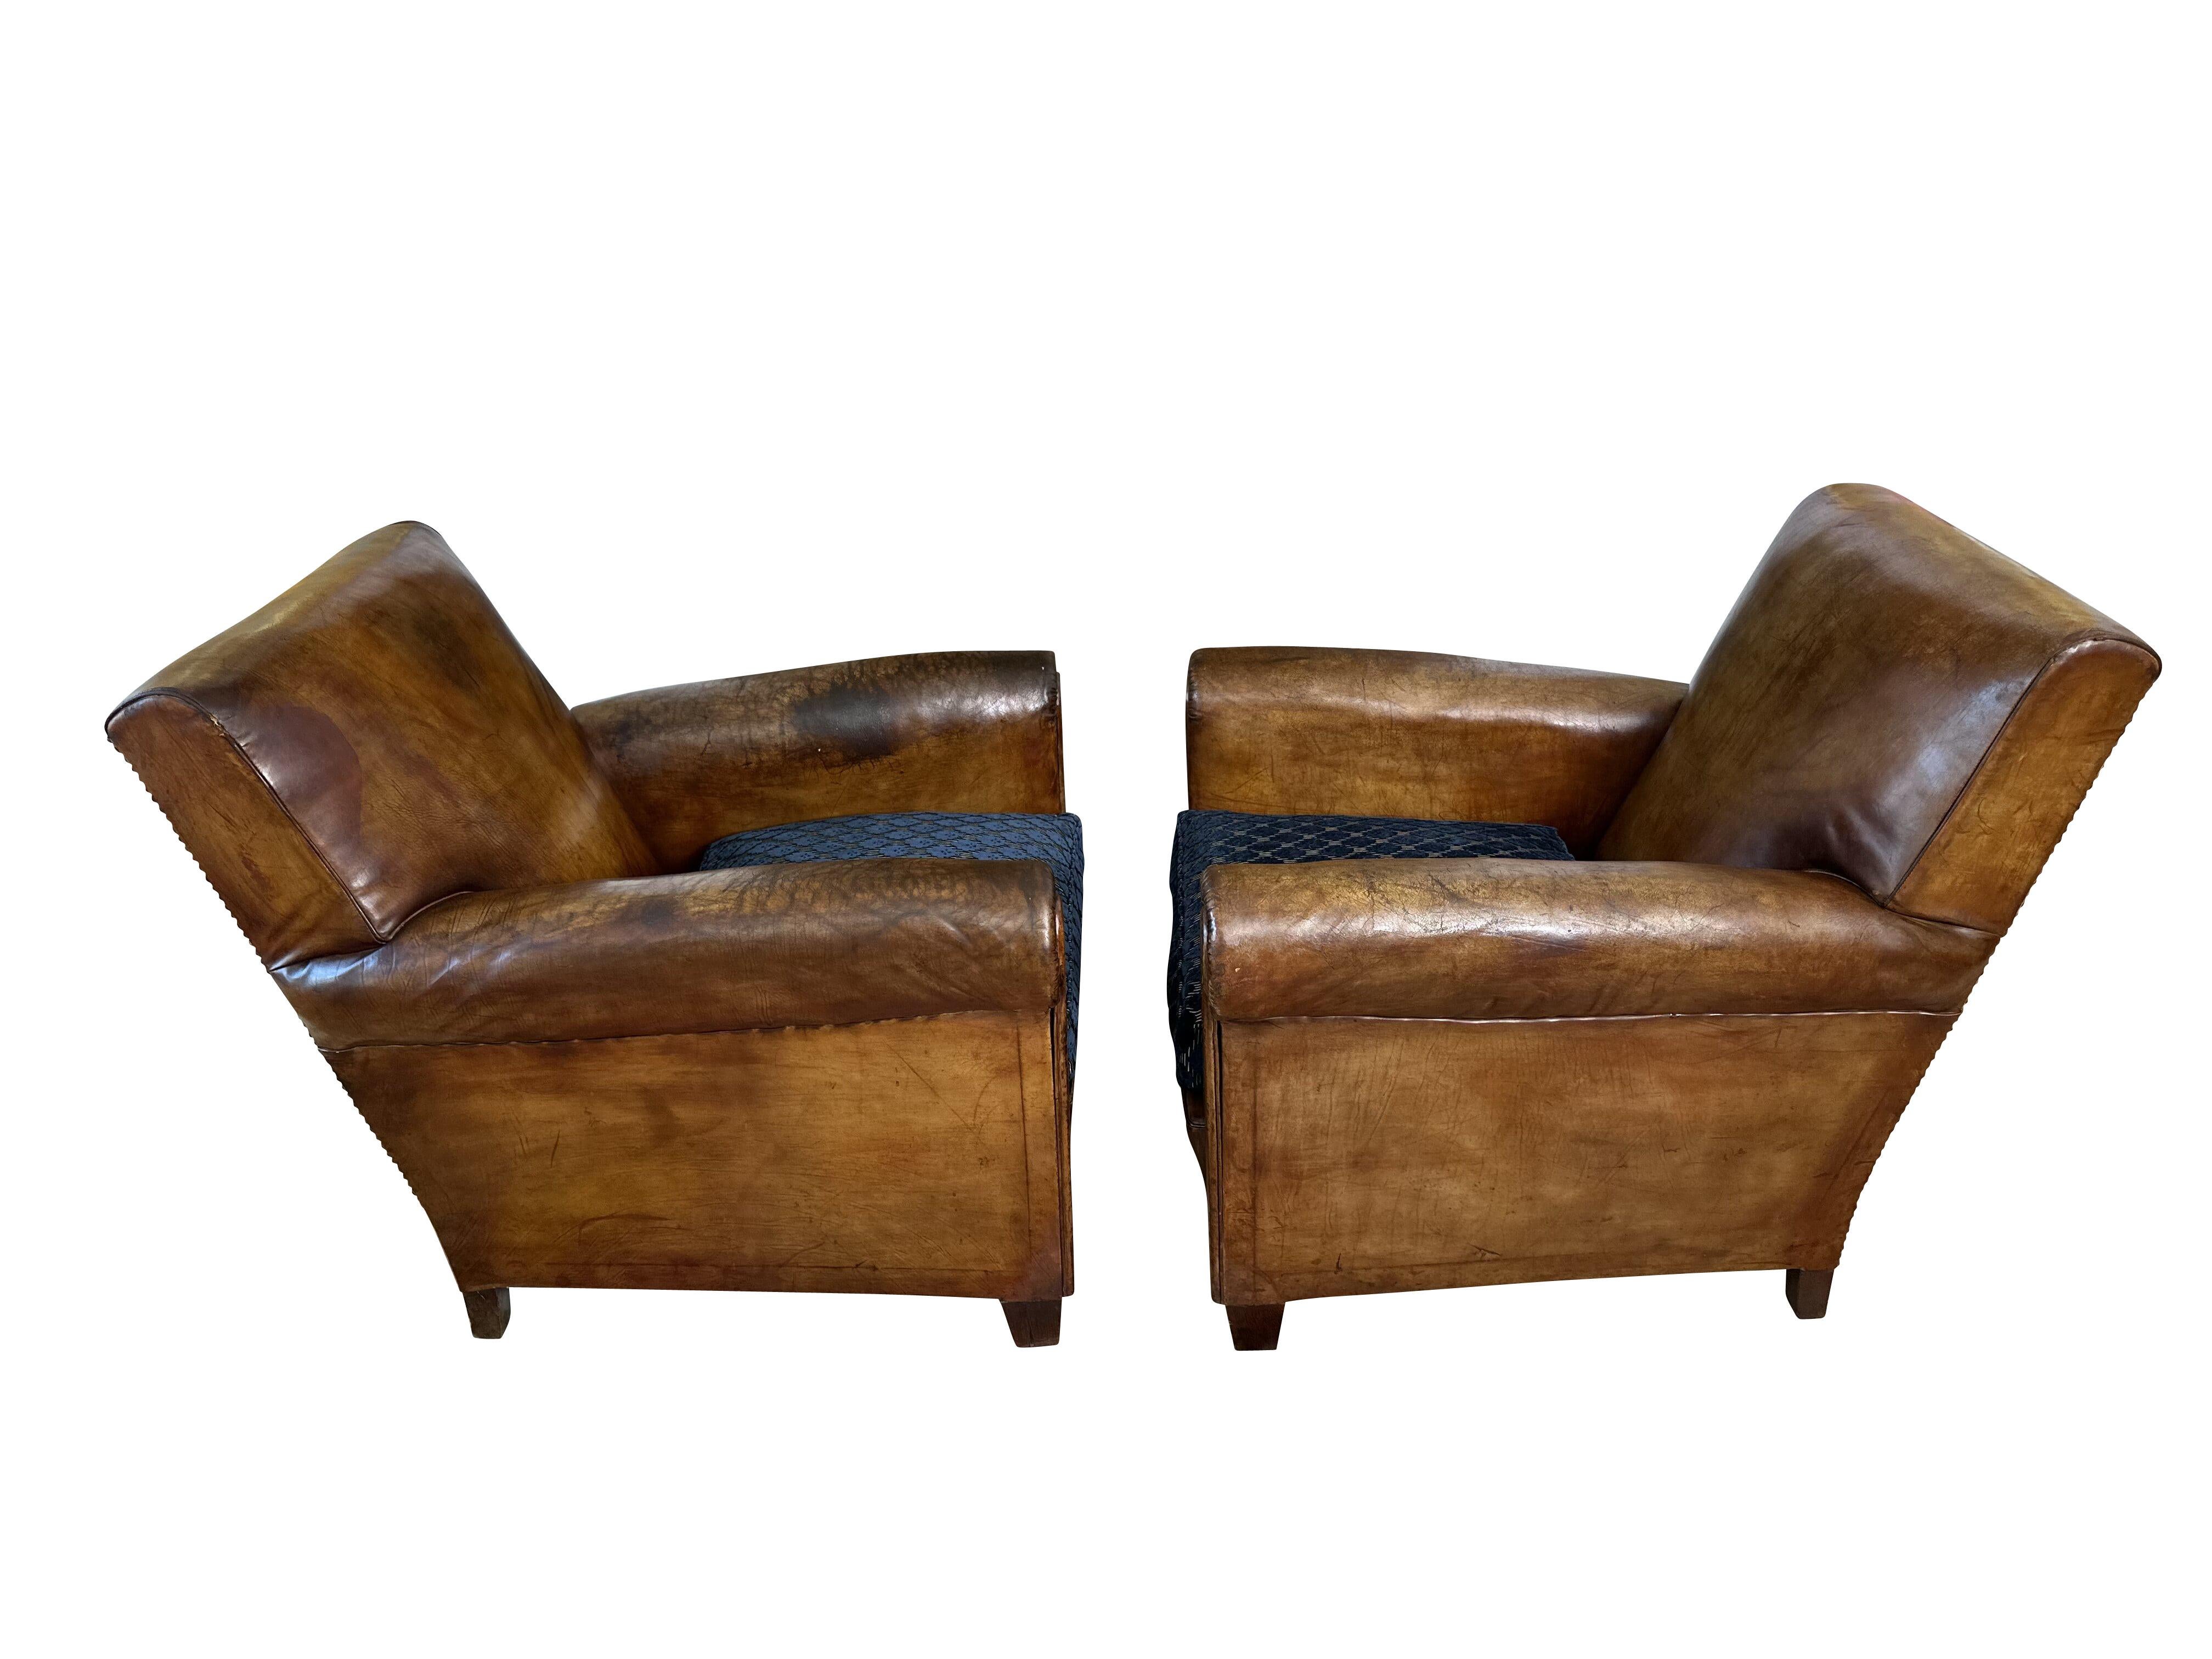 1930's Vintage Art Deco Leather Club Chairs - A Pair For Sale 3